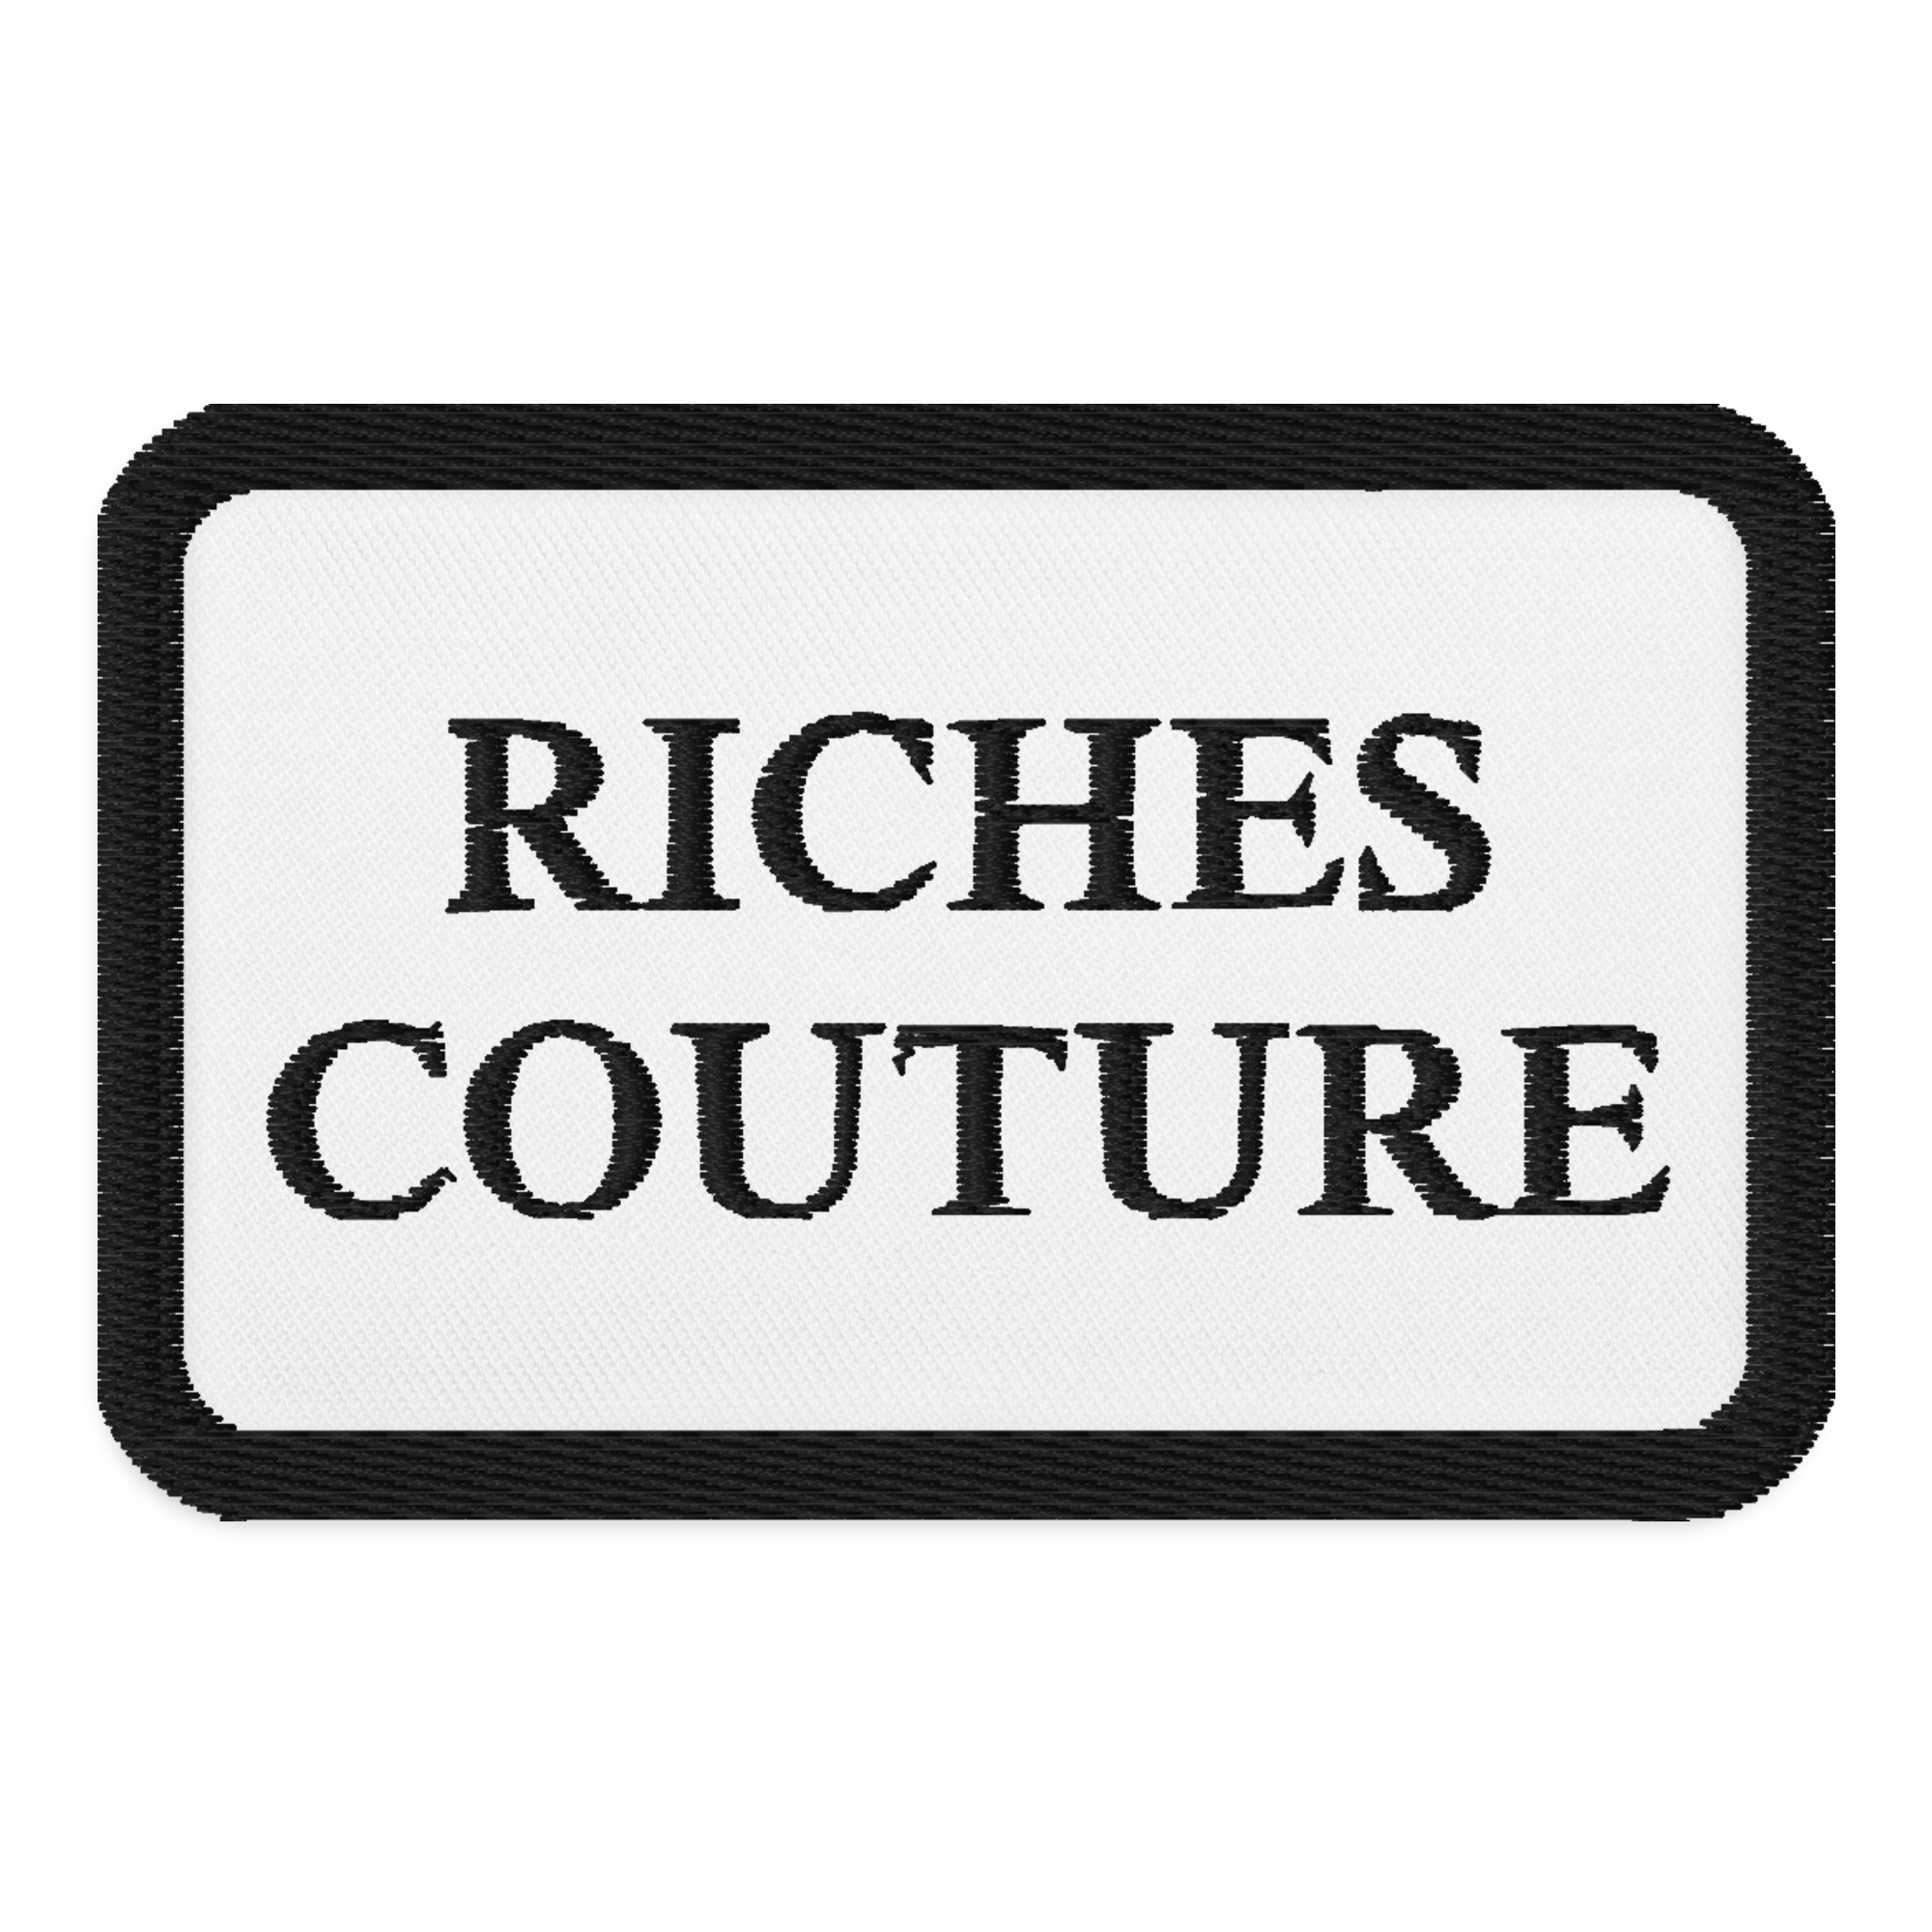 Riches Couture Black Embroidered Patch